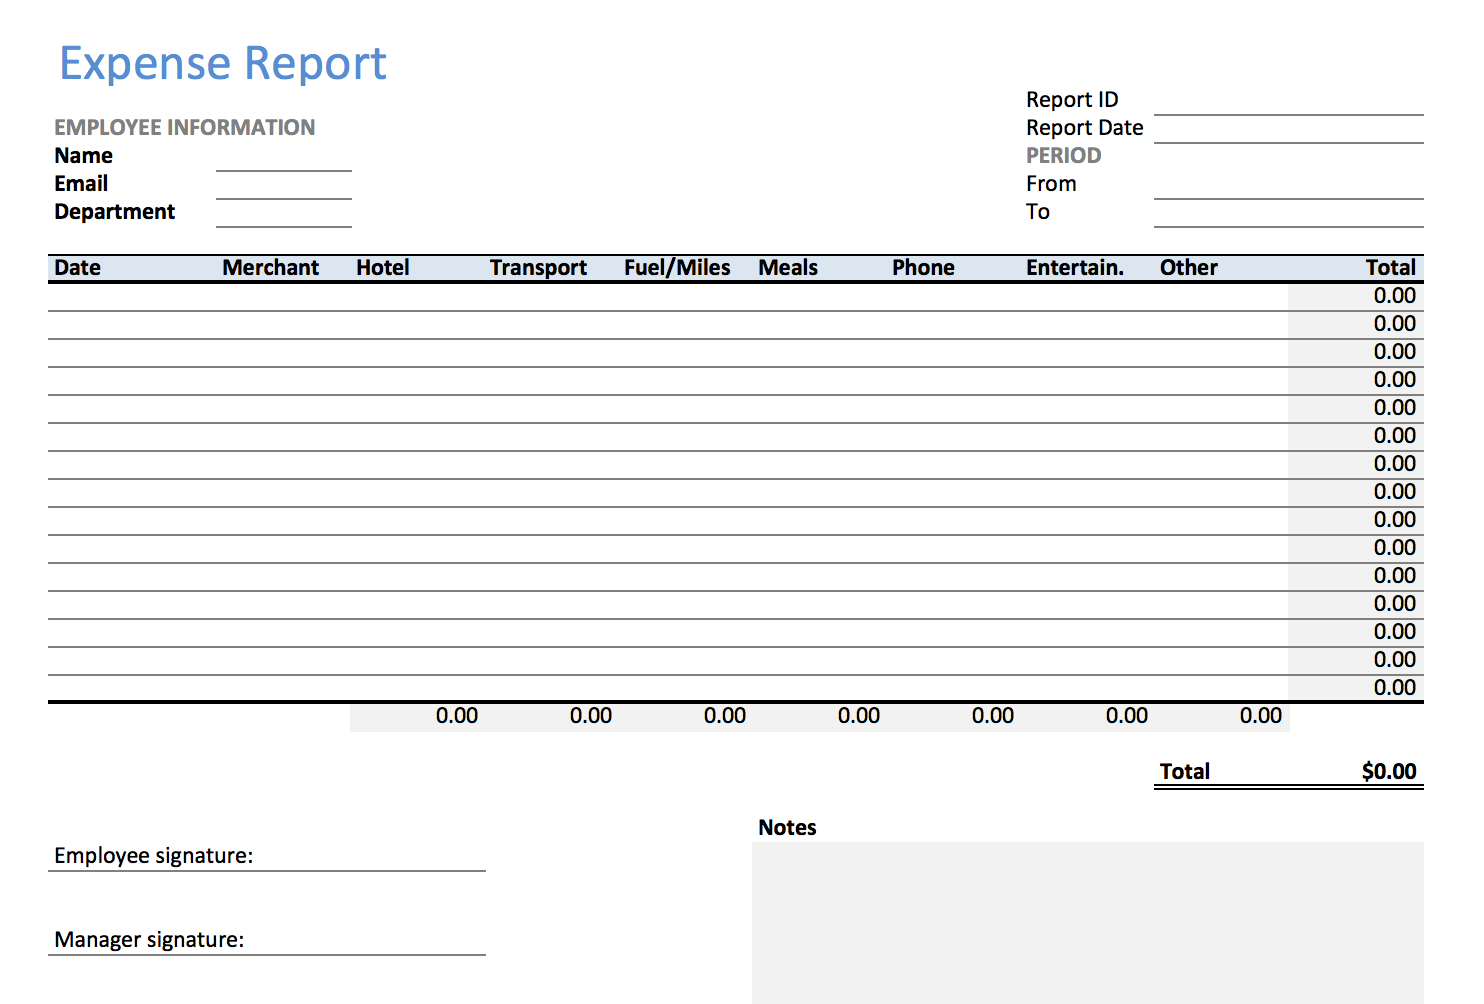 Excel Expense Report Template - KEEPEK Throughout Monthly Expense Report Template Excel